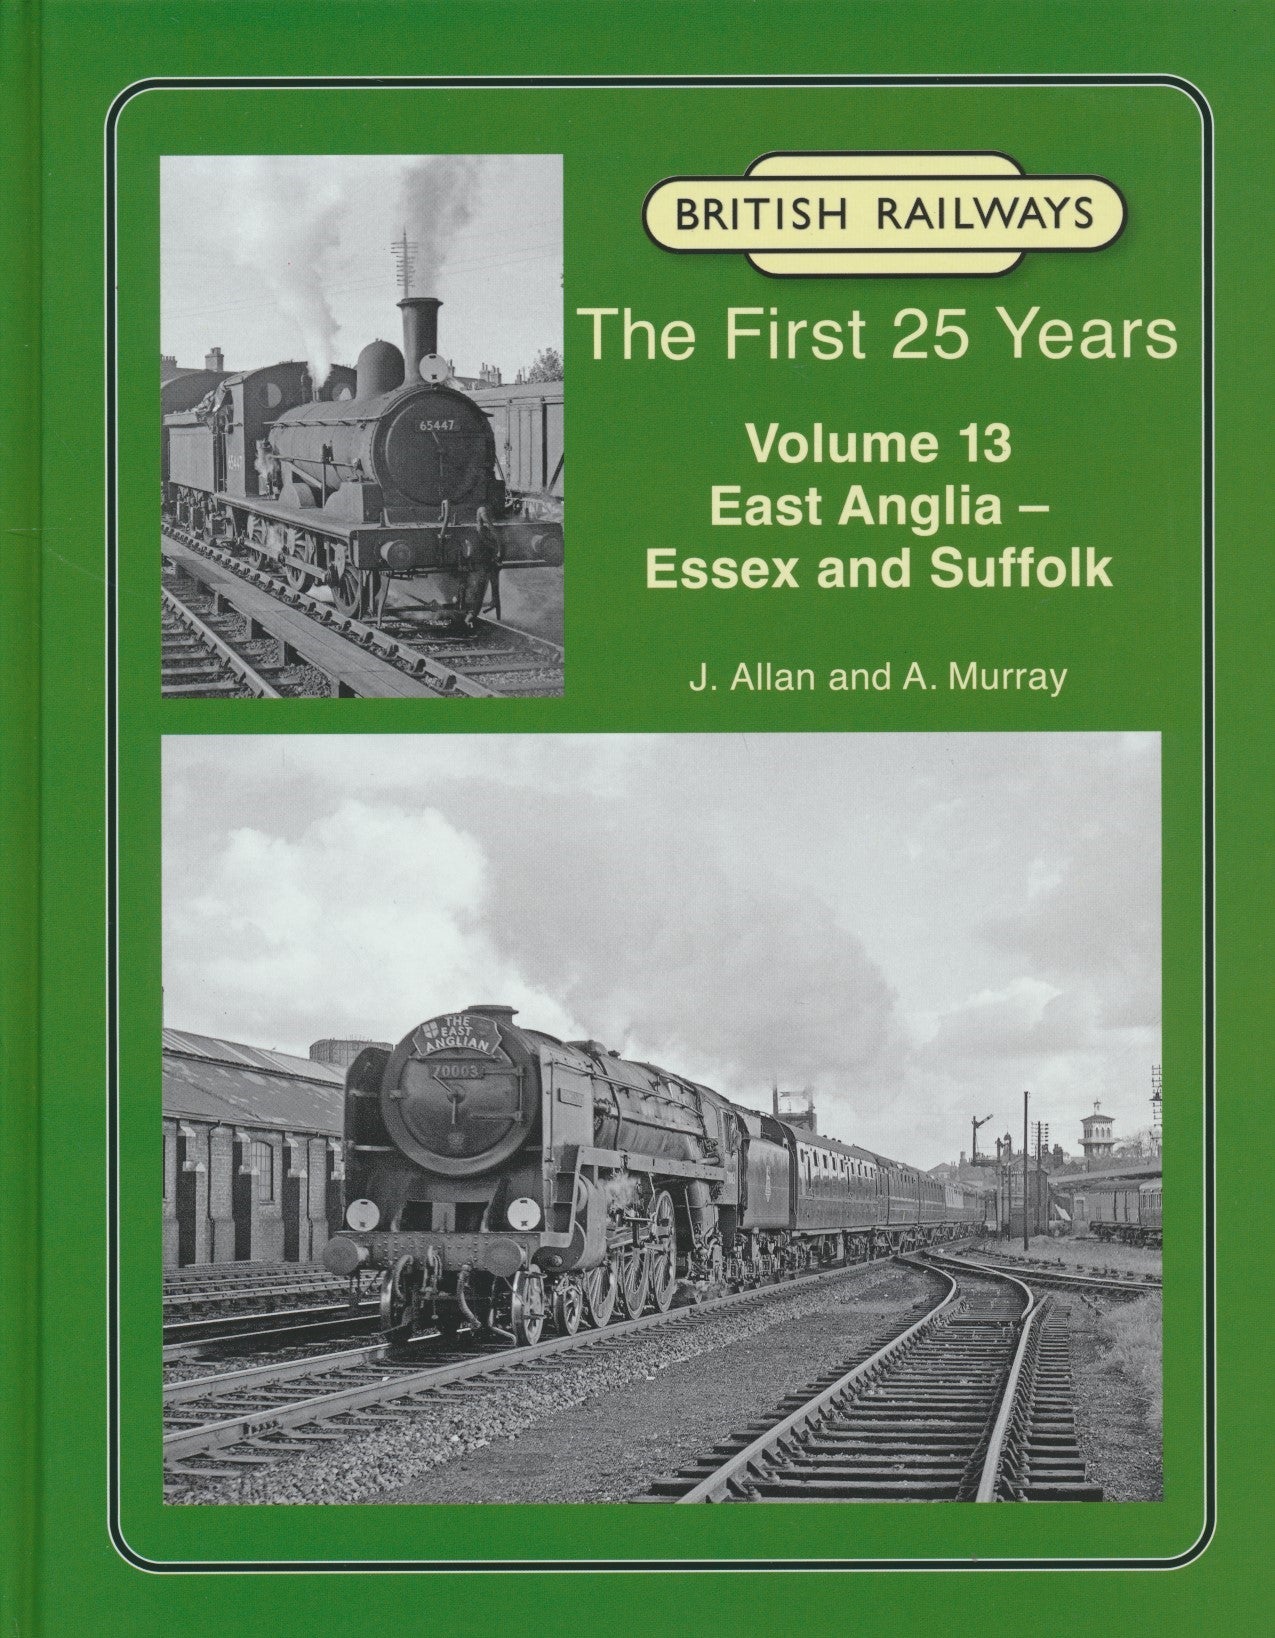 British Railways The First 25 Years, Volume 13: East Anglia – Essex and Suffolk